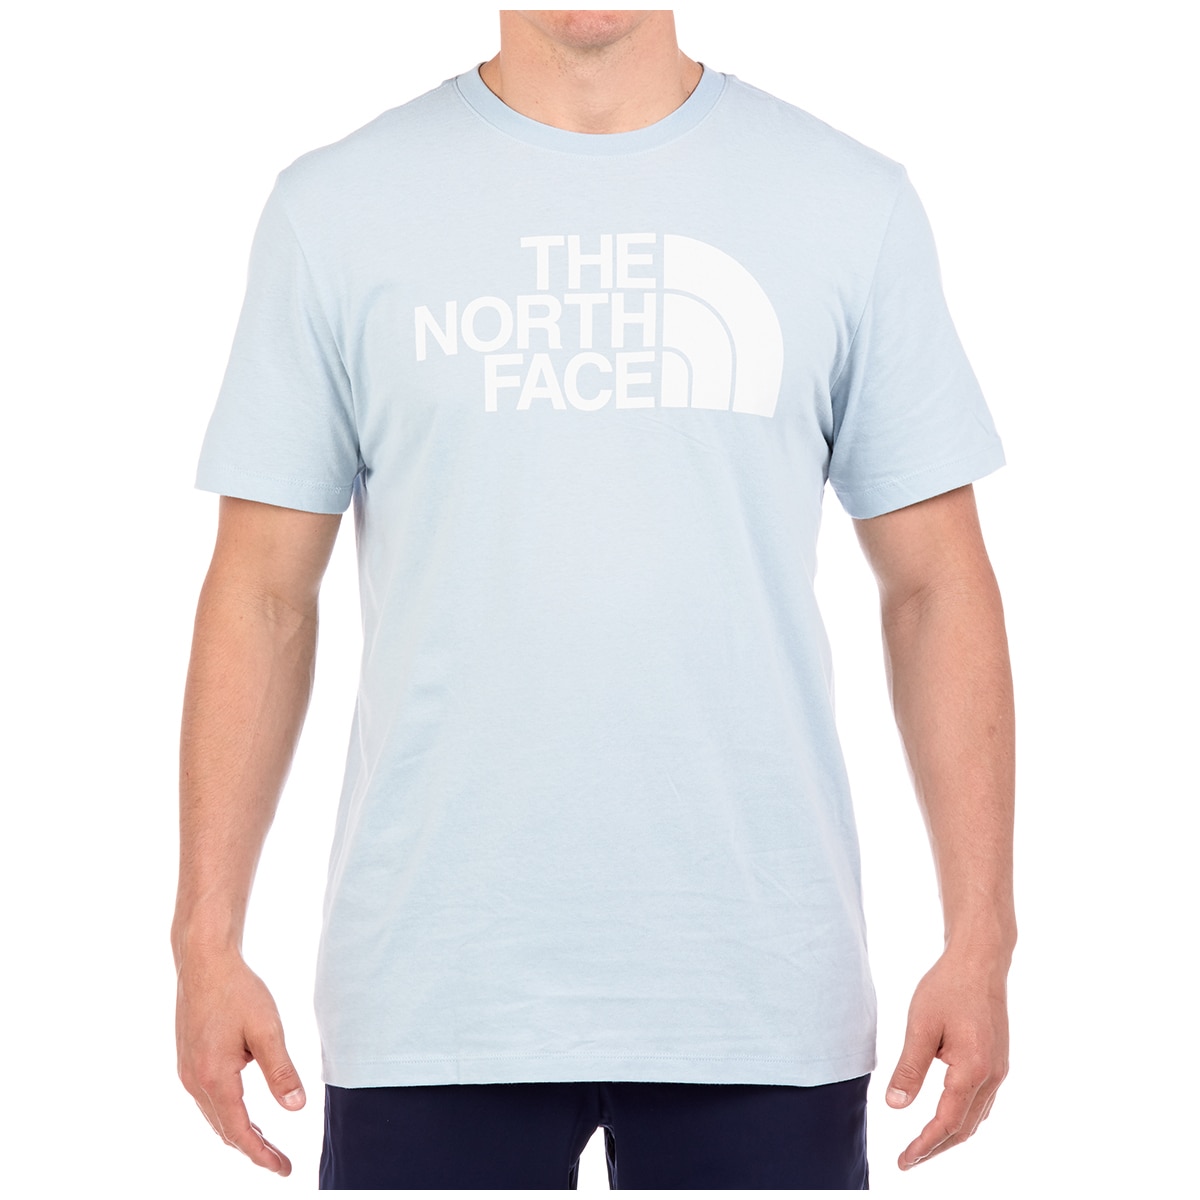 North face Half dome Tee - Faded Blue